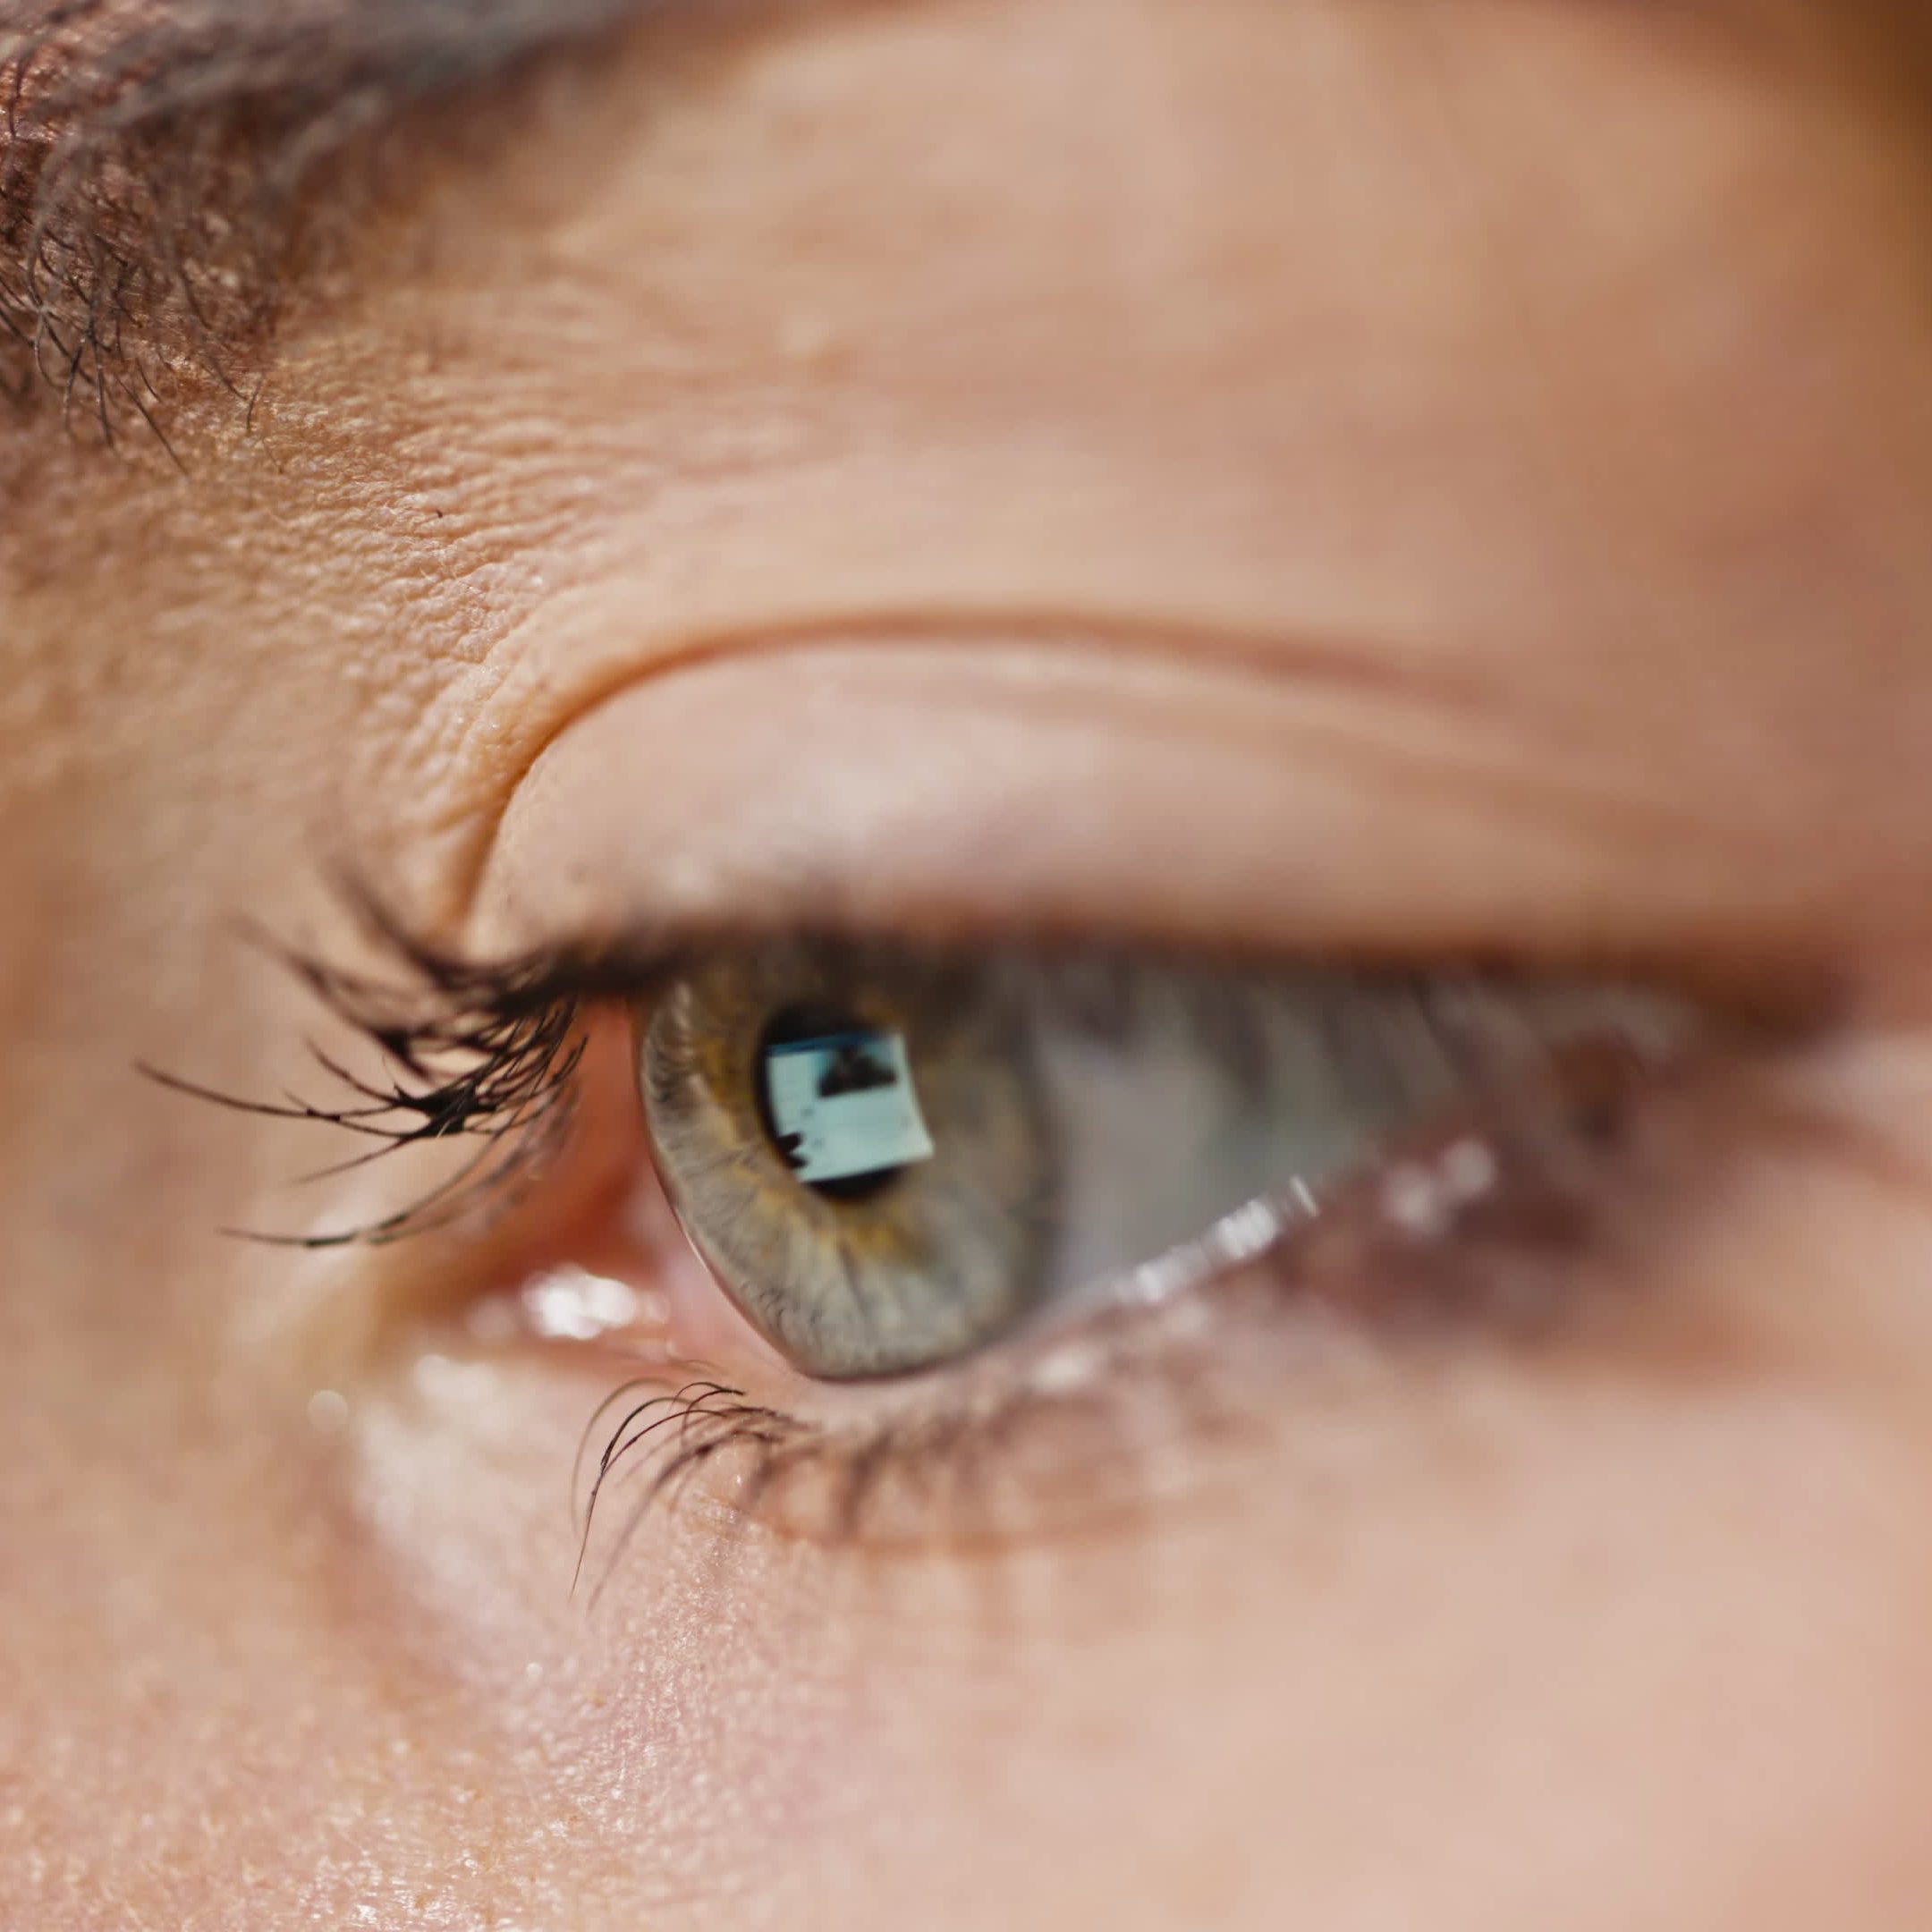 6 Things That Could Happen to Your Eyes if You Stare at a Screen All Day